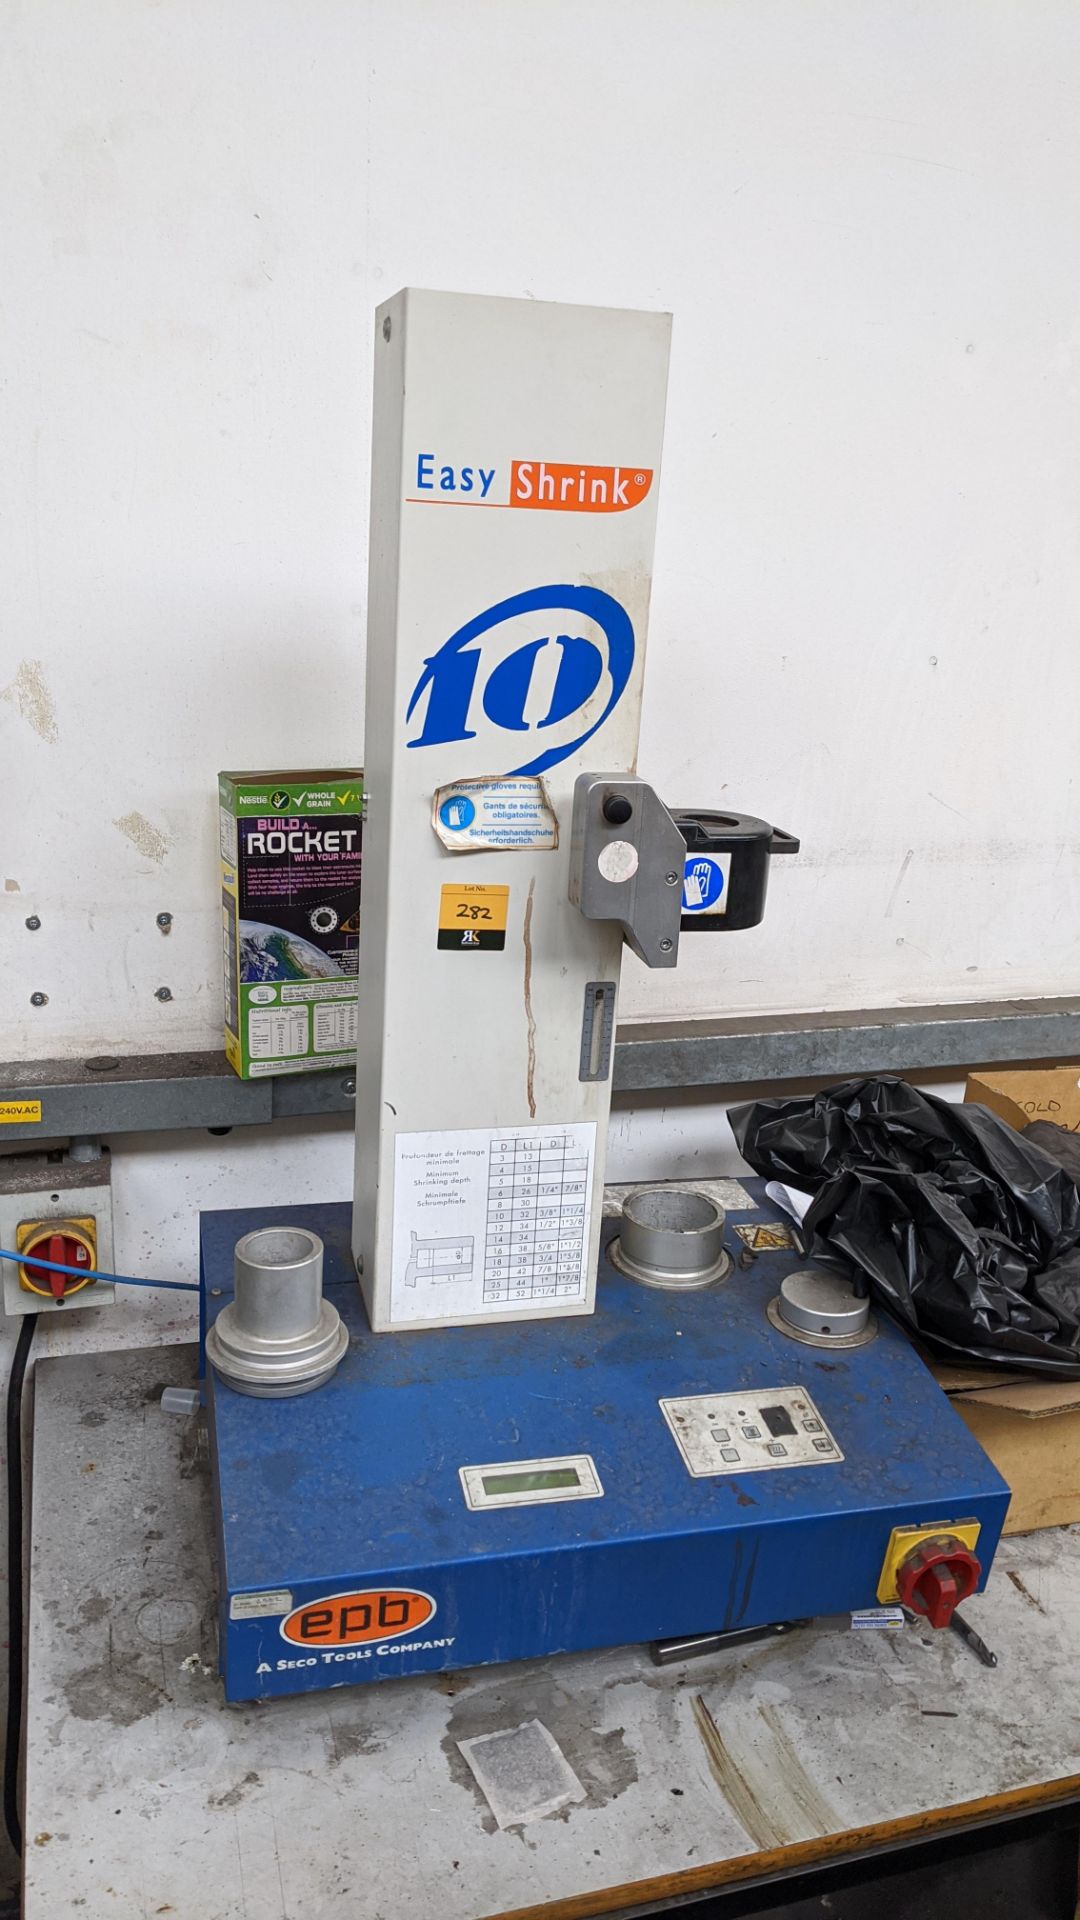 EPB Easy Shrink 10 plus table of tooling & all other items as pictured adjacent to this machine, - Image 4 of 12